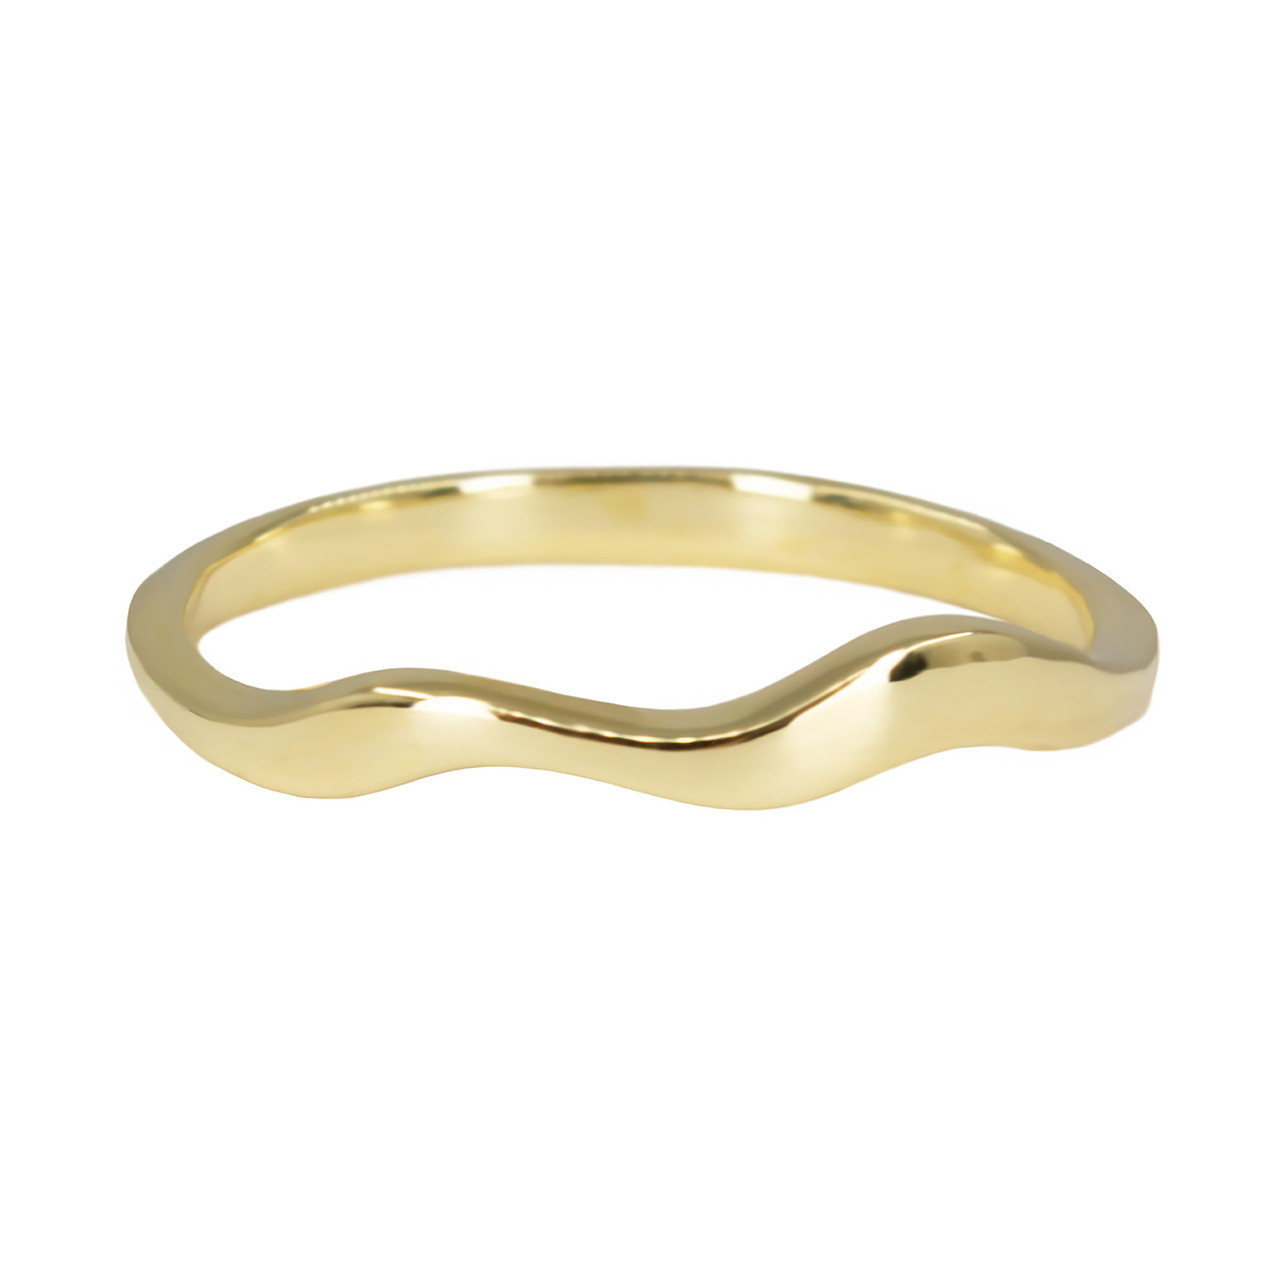 Gold Curved Flow Band, Irena Chmura, tomfoolery